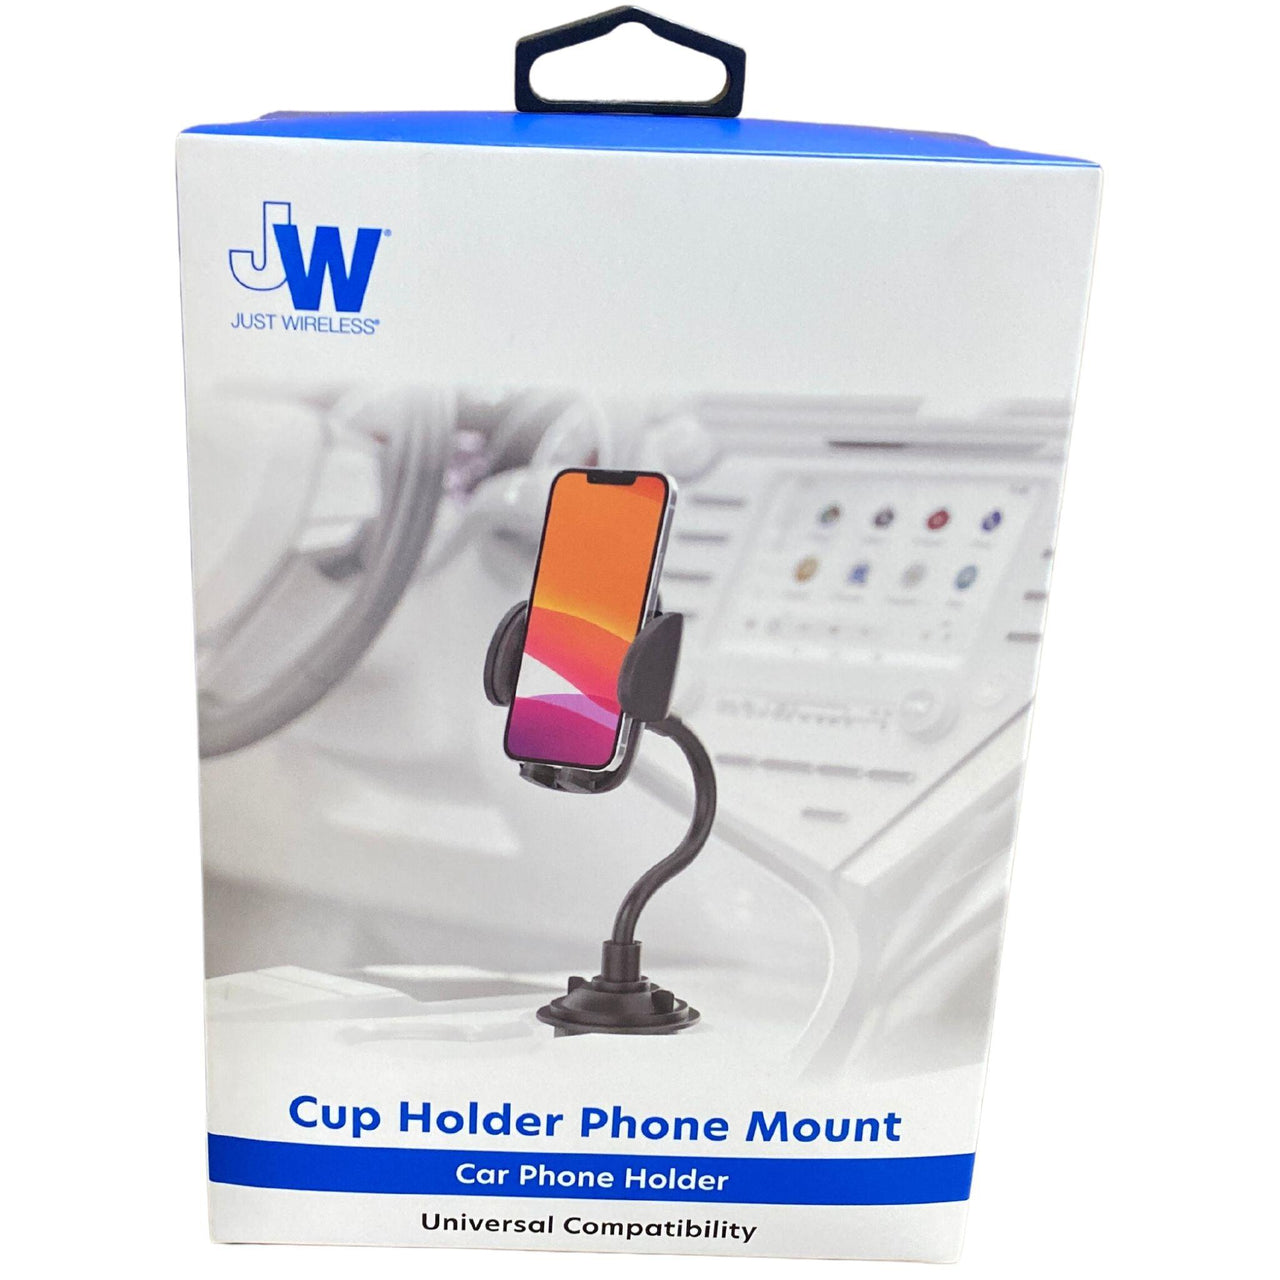 Just Wireless' Cup Holder Phone Mount (70 Pcs Lot) - Discount Wholesalers Inc